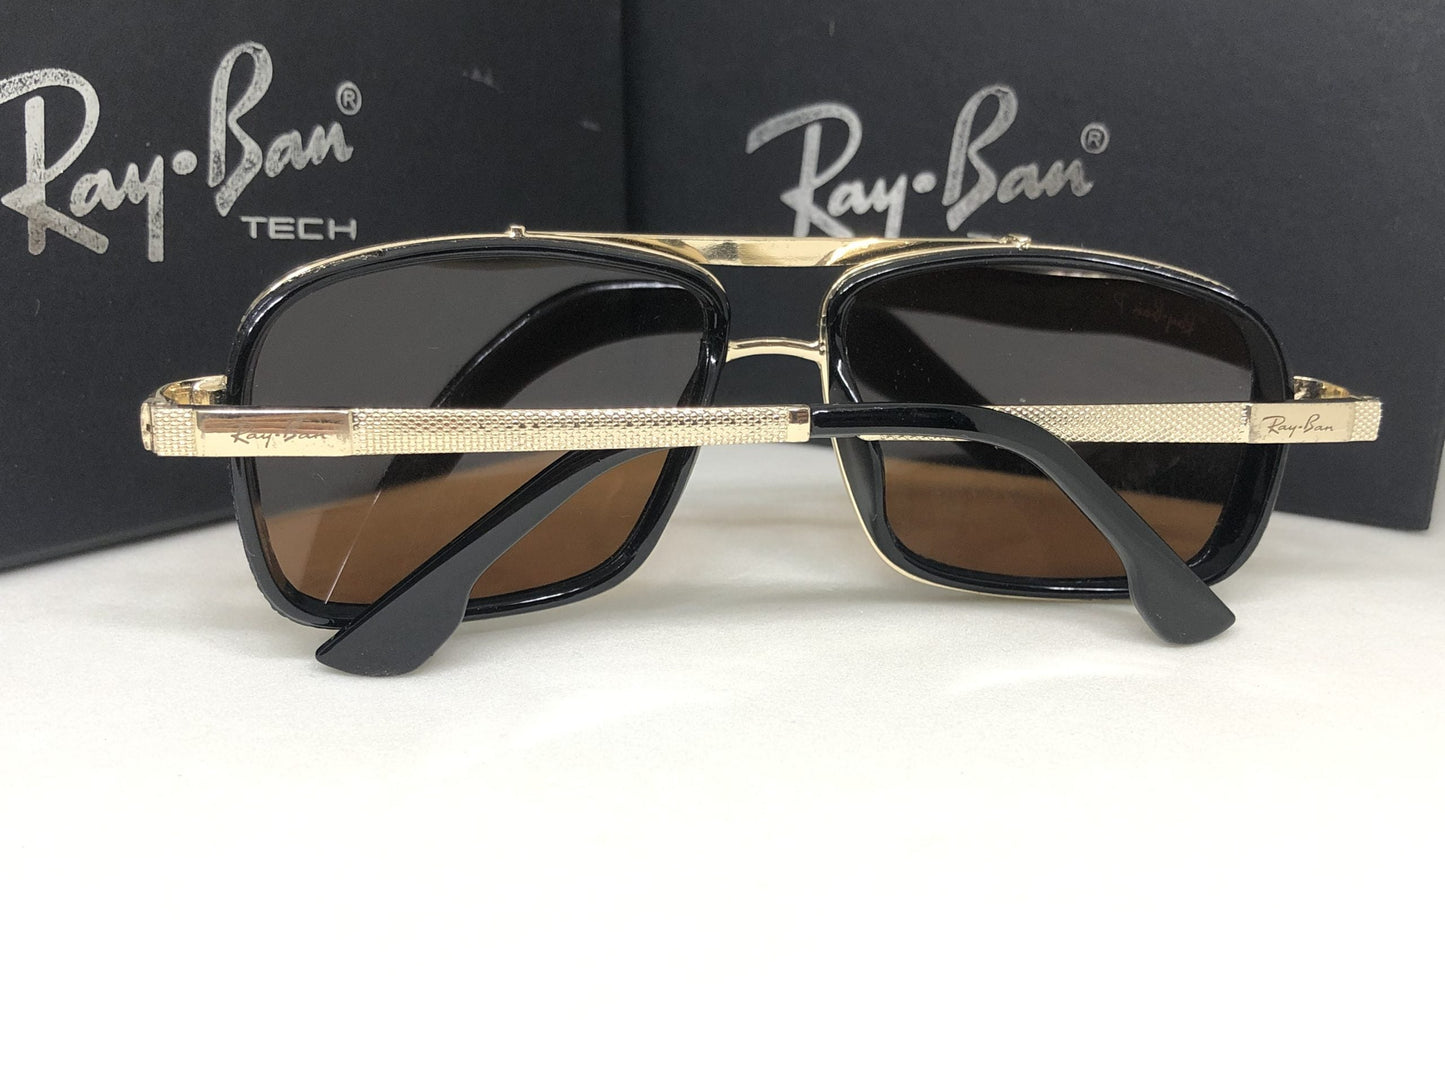 RayBan Square Frame Sunglass With Brown Len's Sunglass For Men's Women's Or Girls Black Glass And Gold Frame Sunglasses RB-0970- Unisex Sunglass